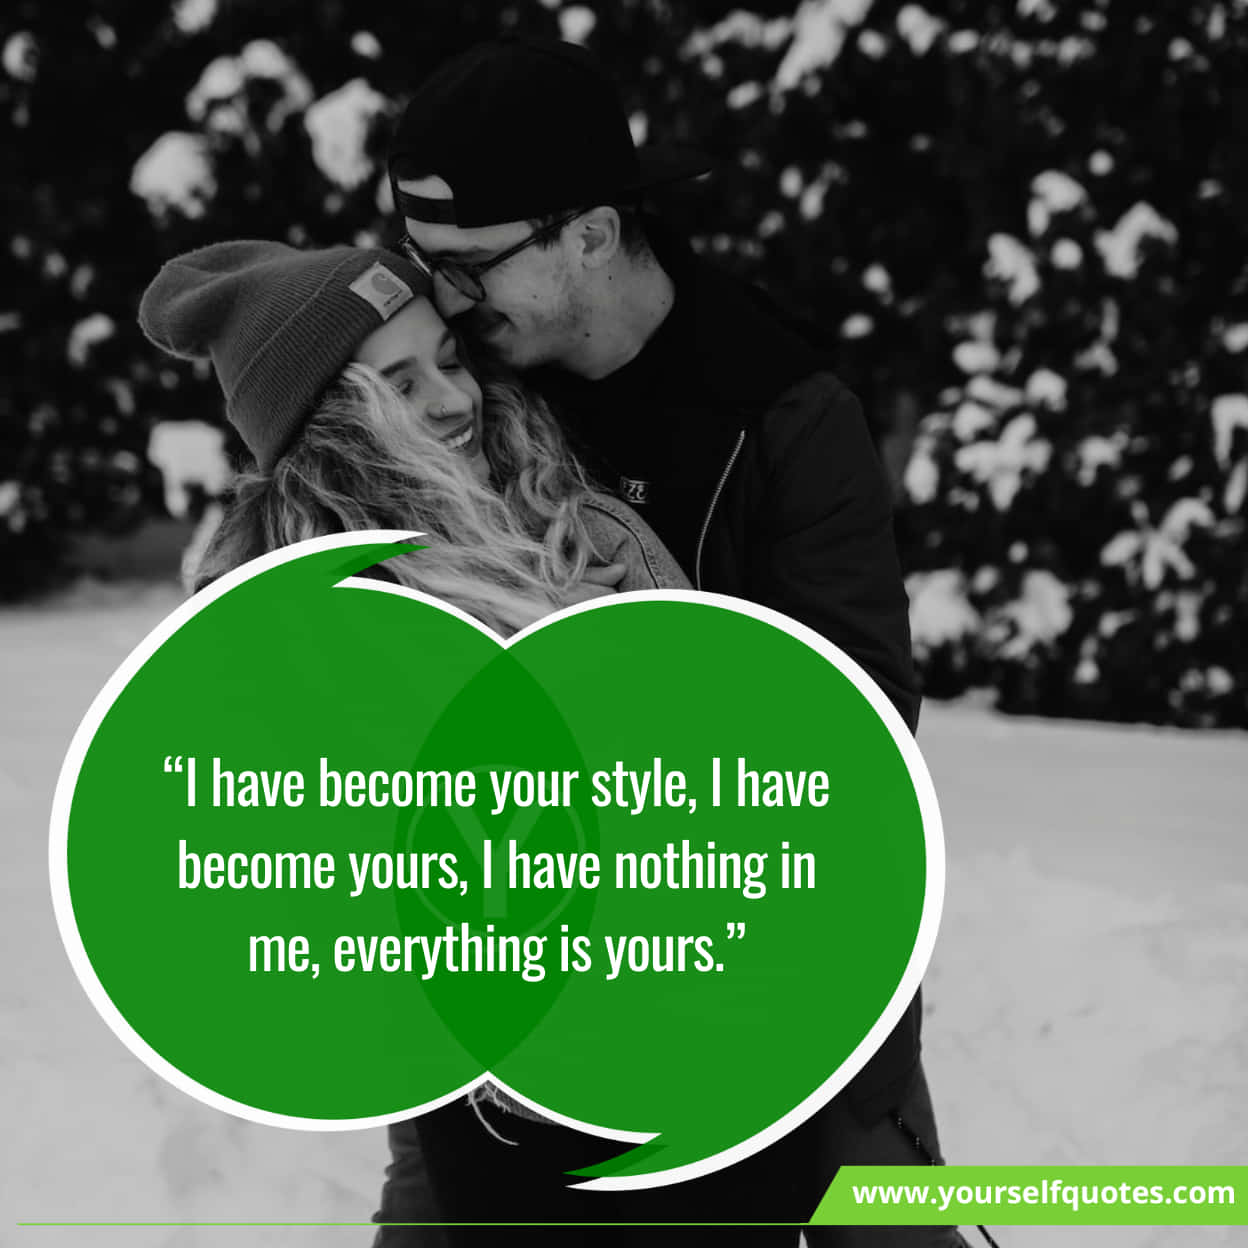 Alluring Love Messages Sayings For Her